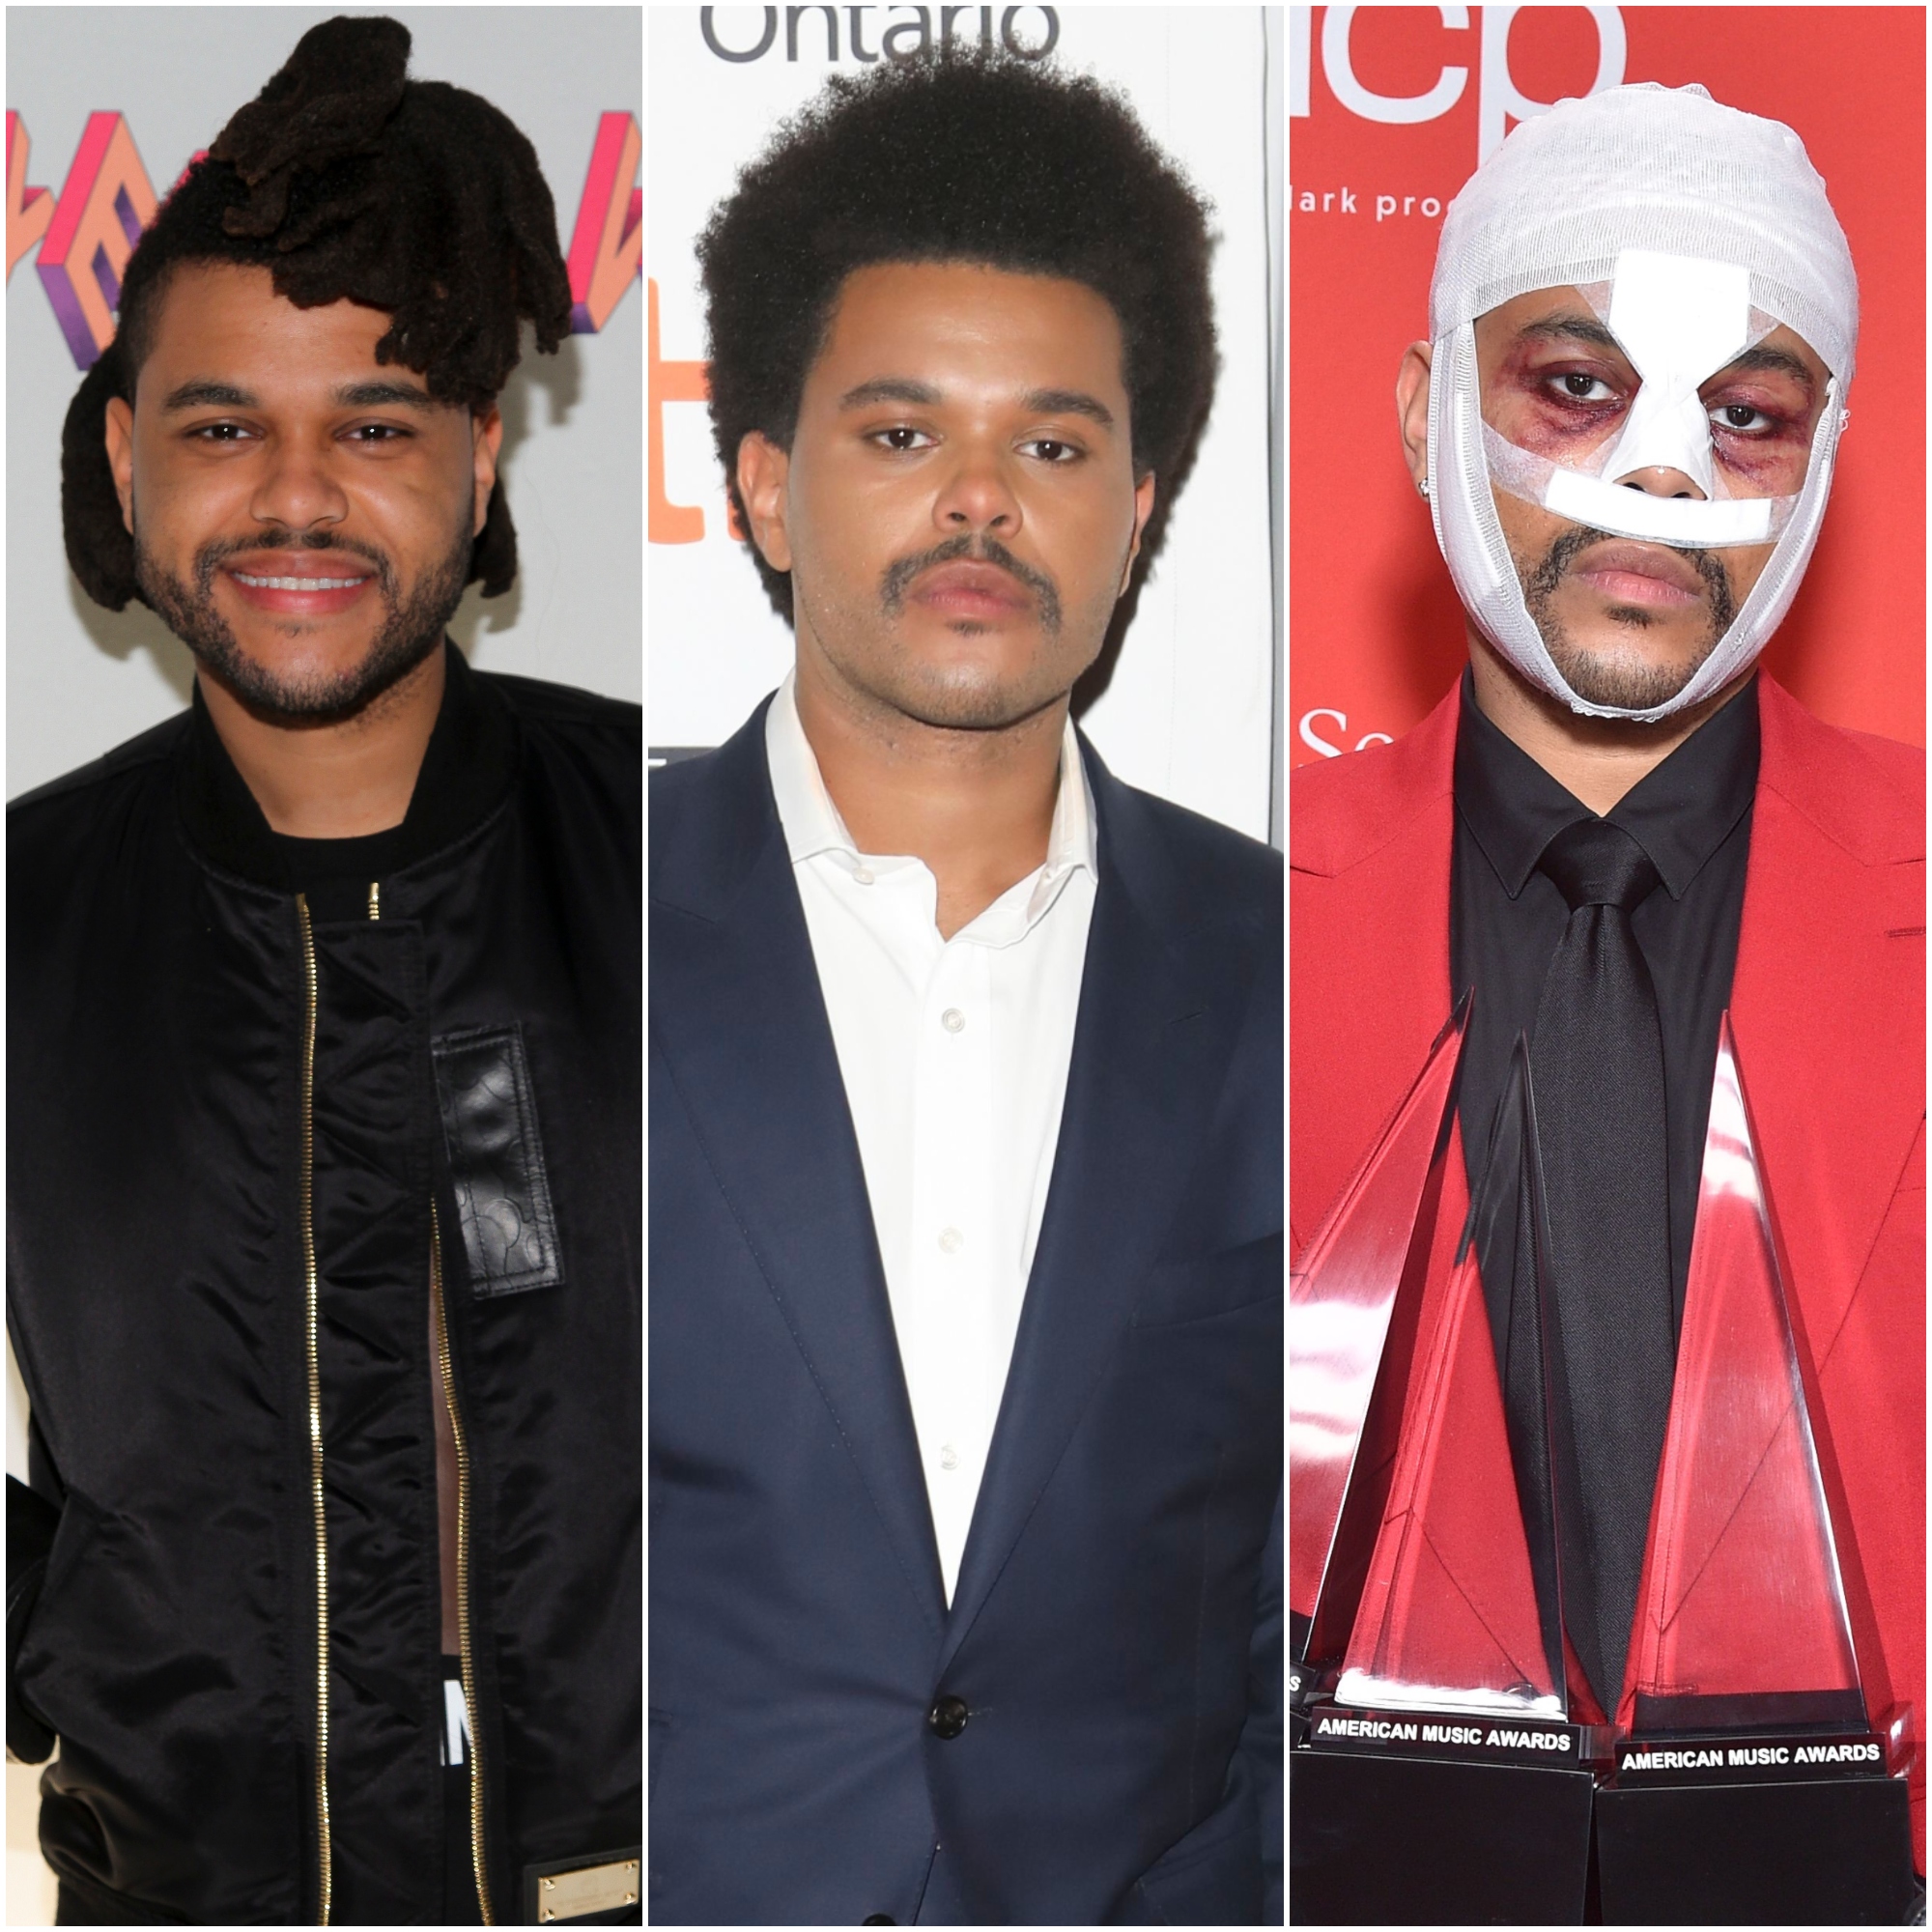 The Weeknd Changed His Hairstyle and Got a Mustache, Fans React